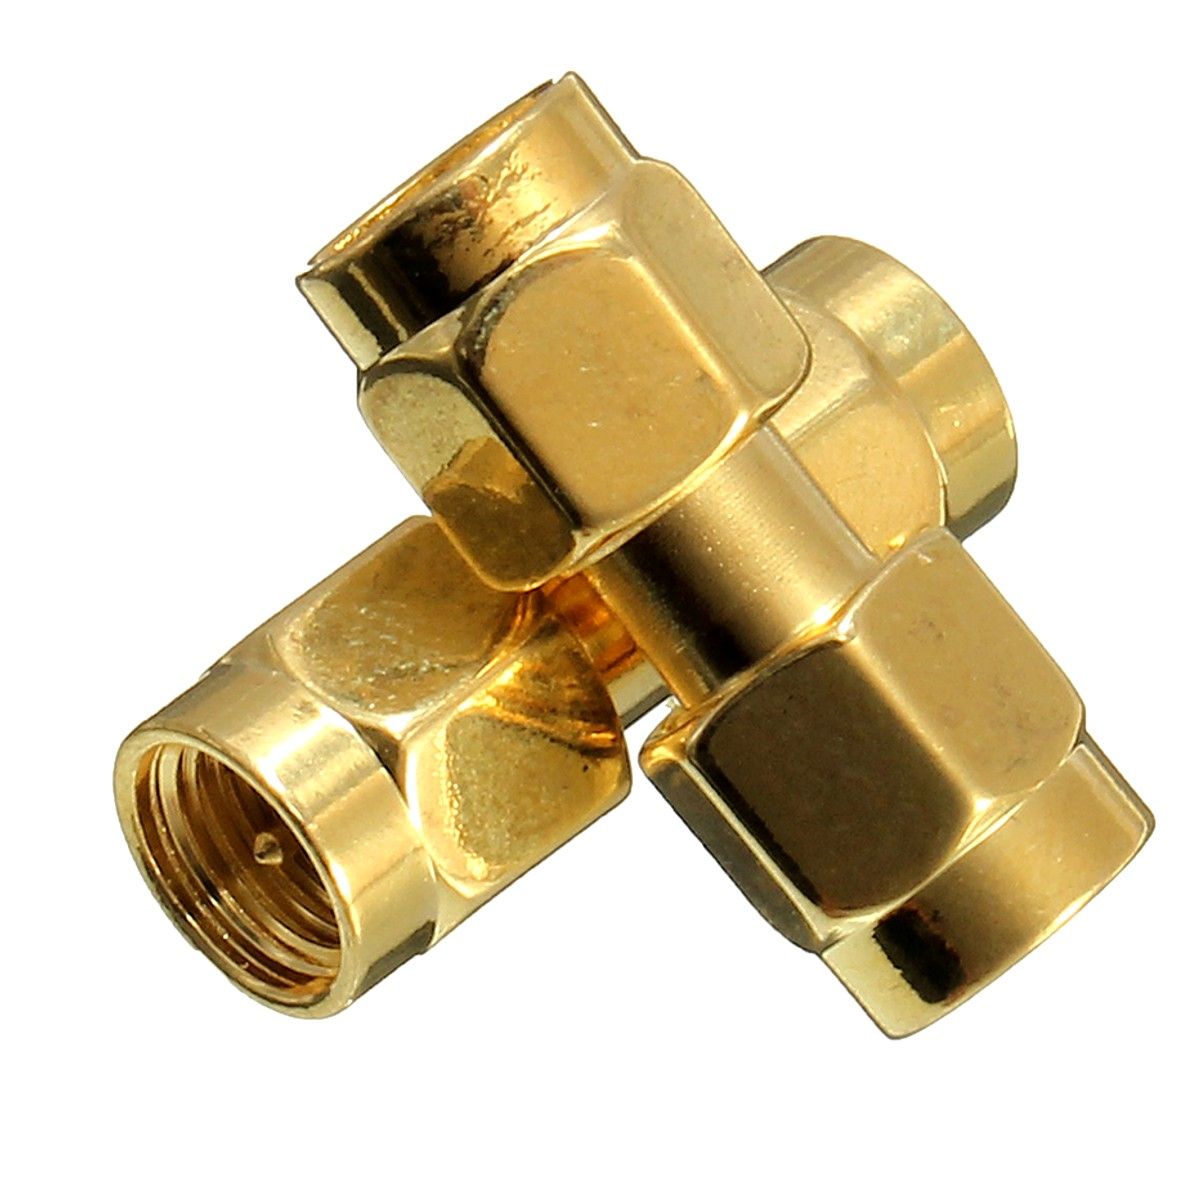 Excellwayreg-CA01-2Pcs-Copper-SMA-Male-To-SMA-Male-Plug-RF-Coaxial-Adapter-Connector-1073343